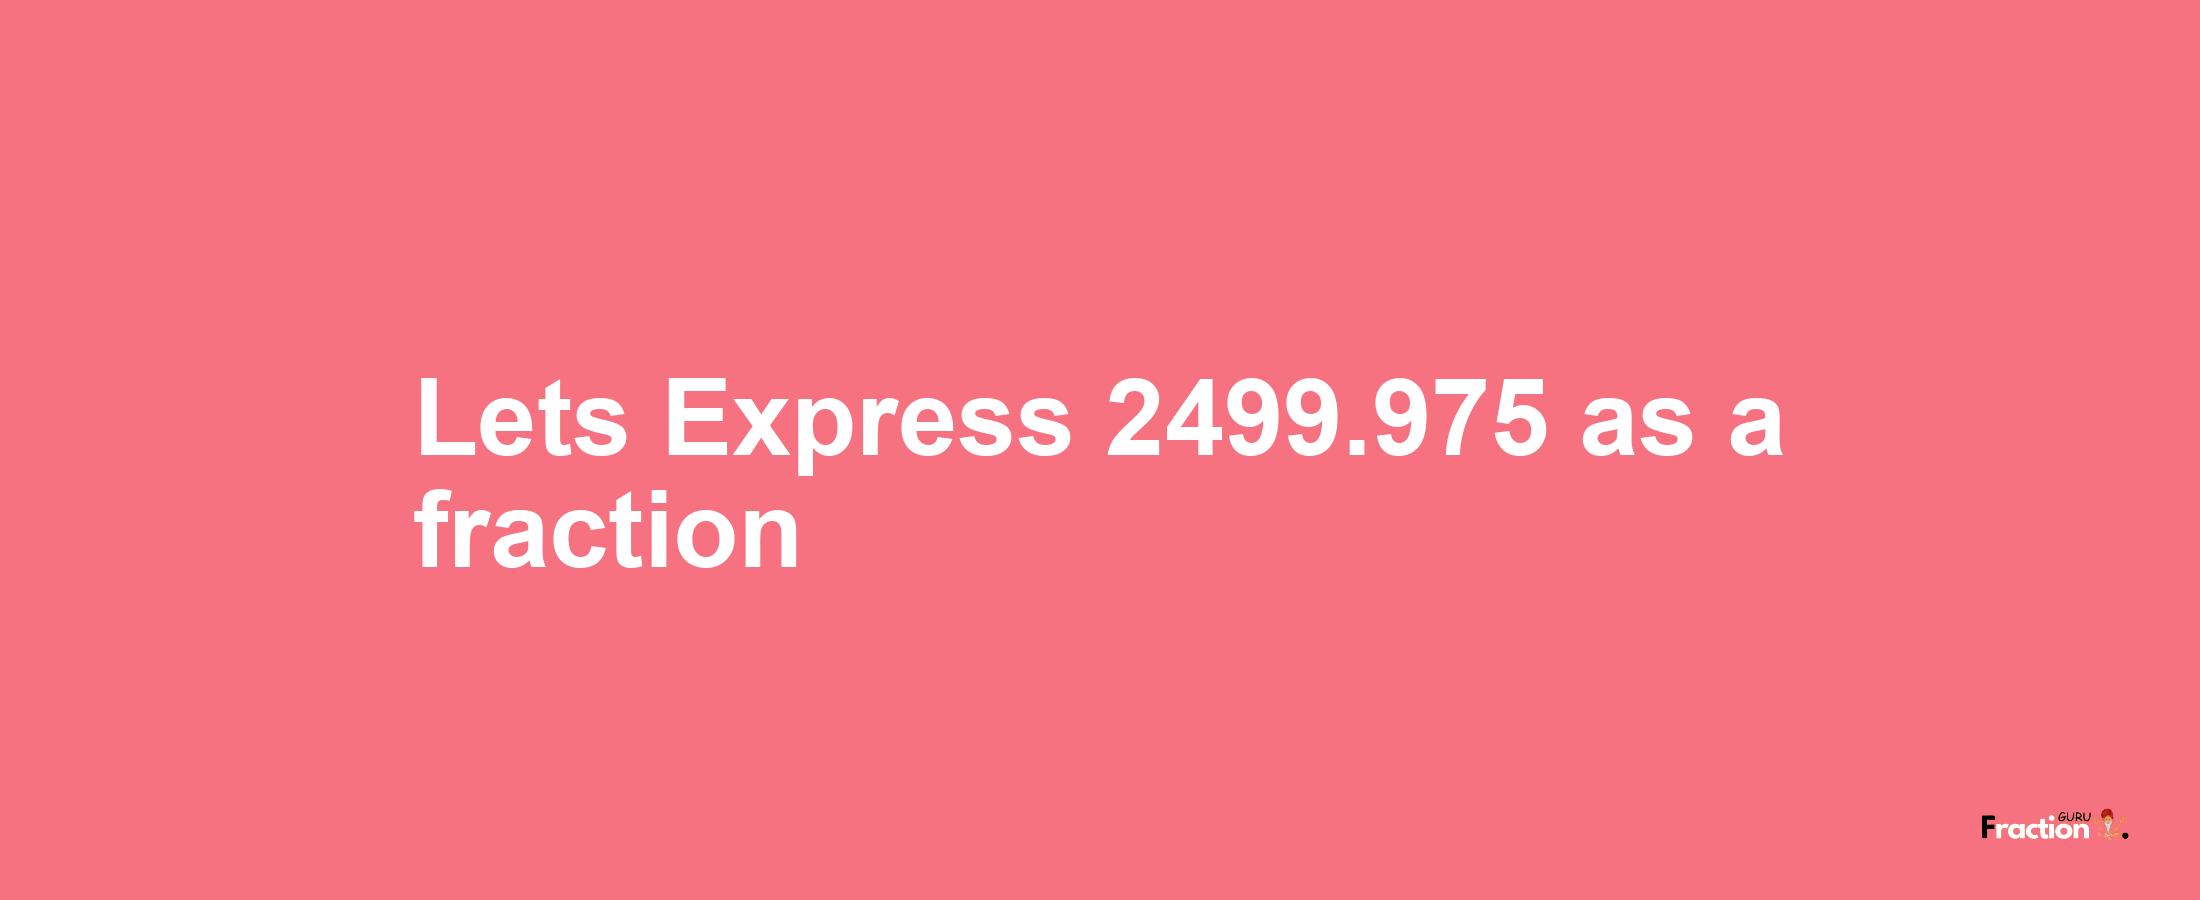 Lets Express 2499.975 as afraction